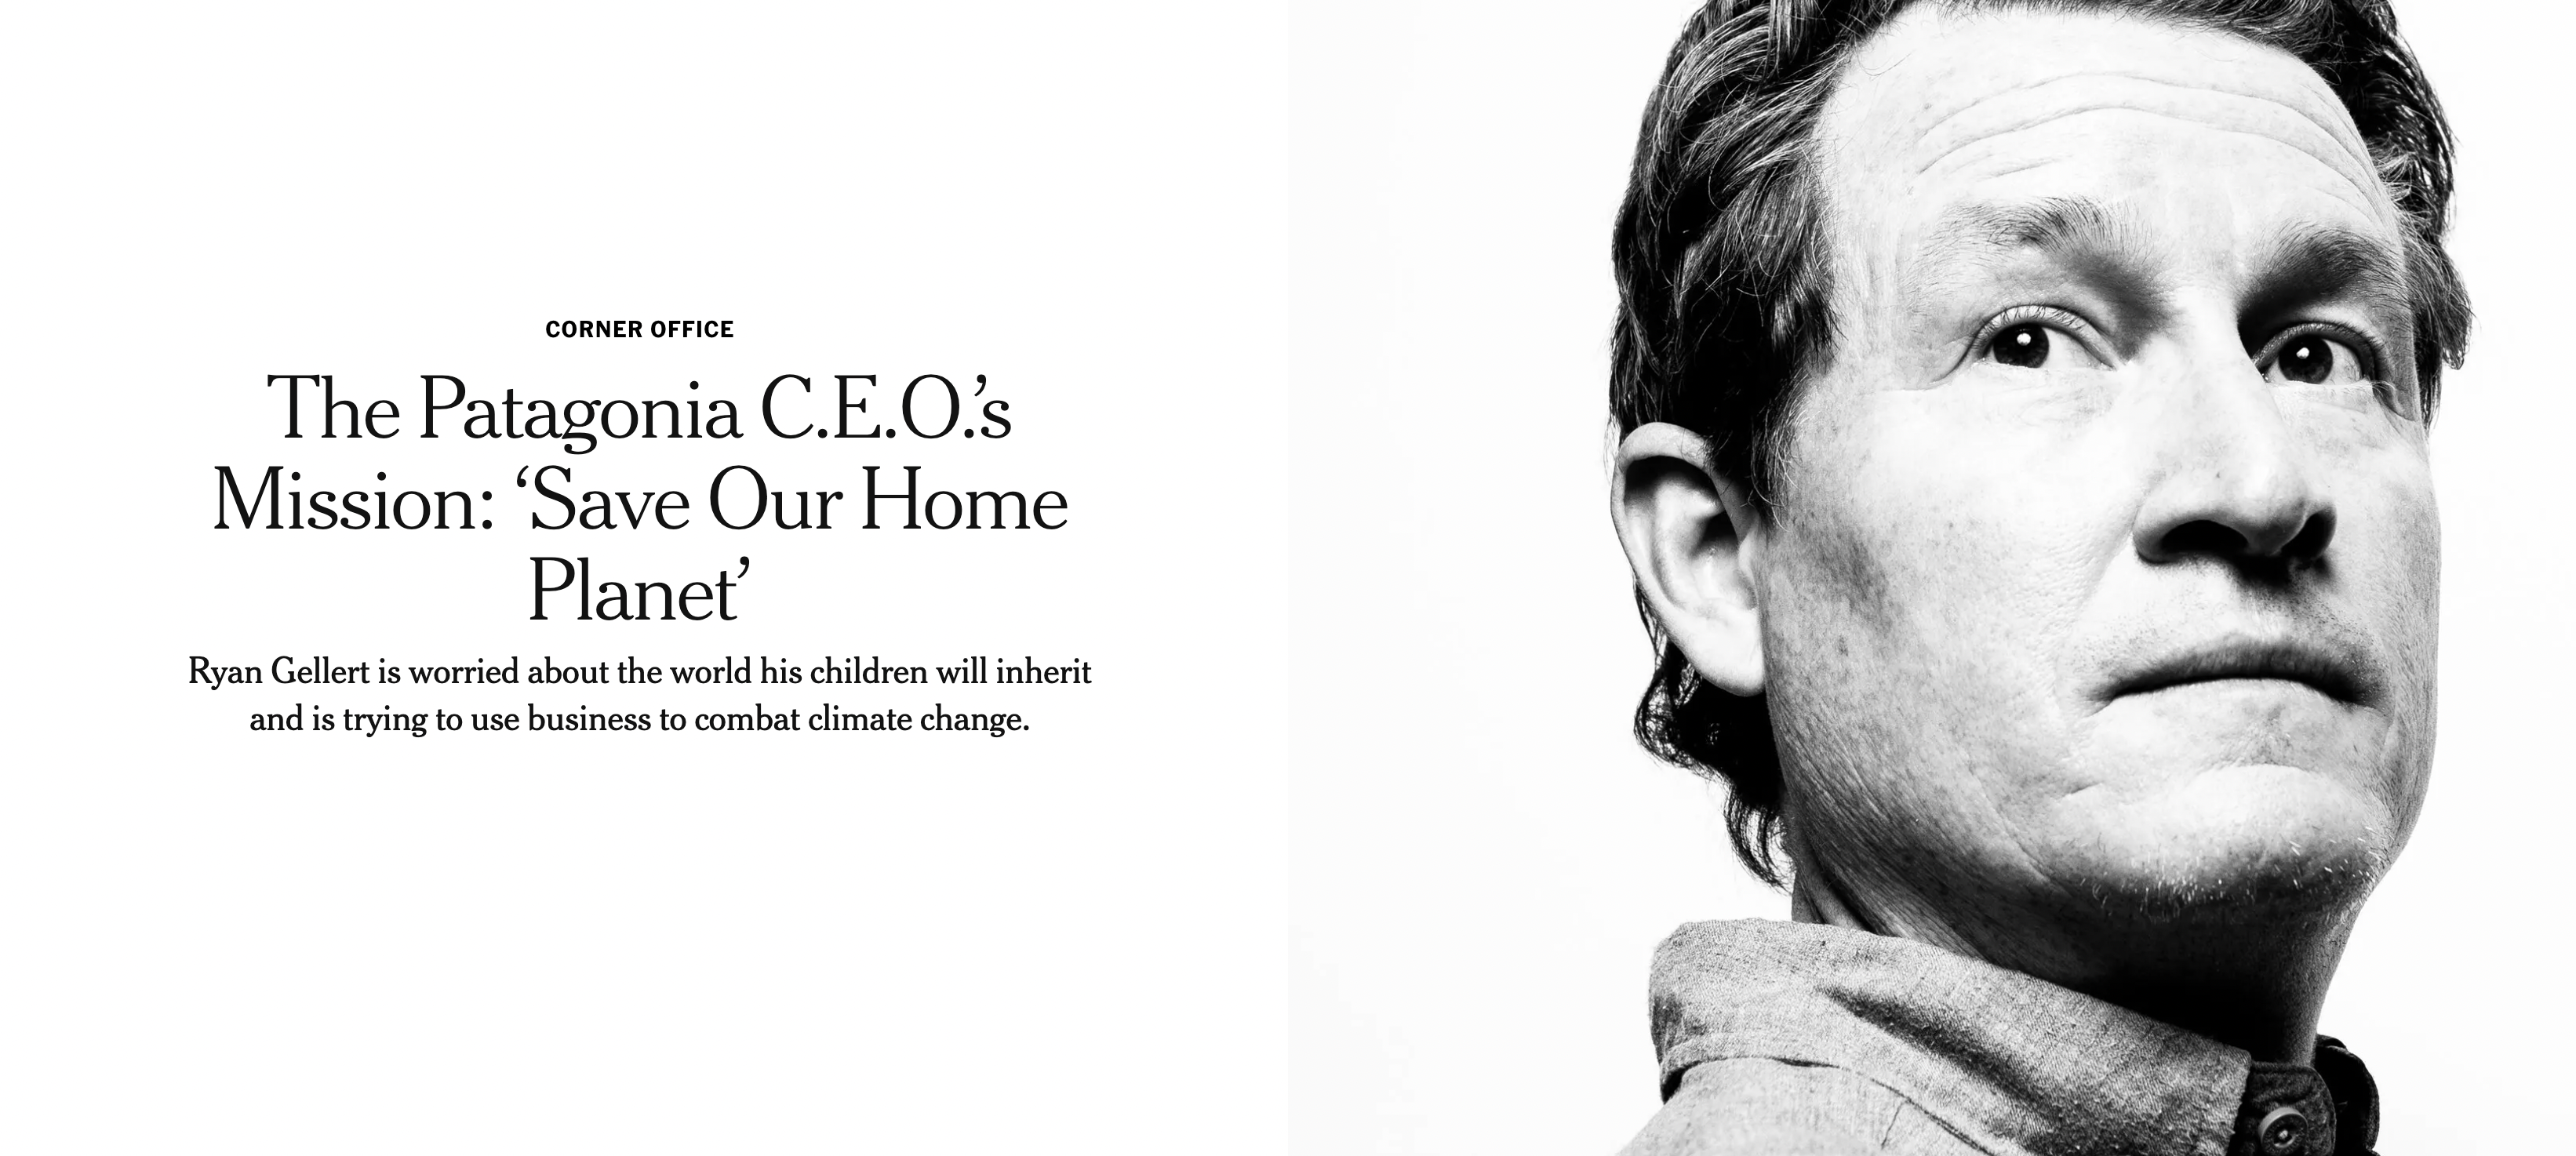 David Gelles, “The Patagonia C.E.O.’s Mission: ‘Save Our Home Planet,’” New York Times, December 10, 2021